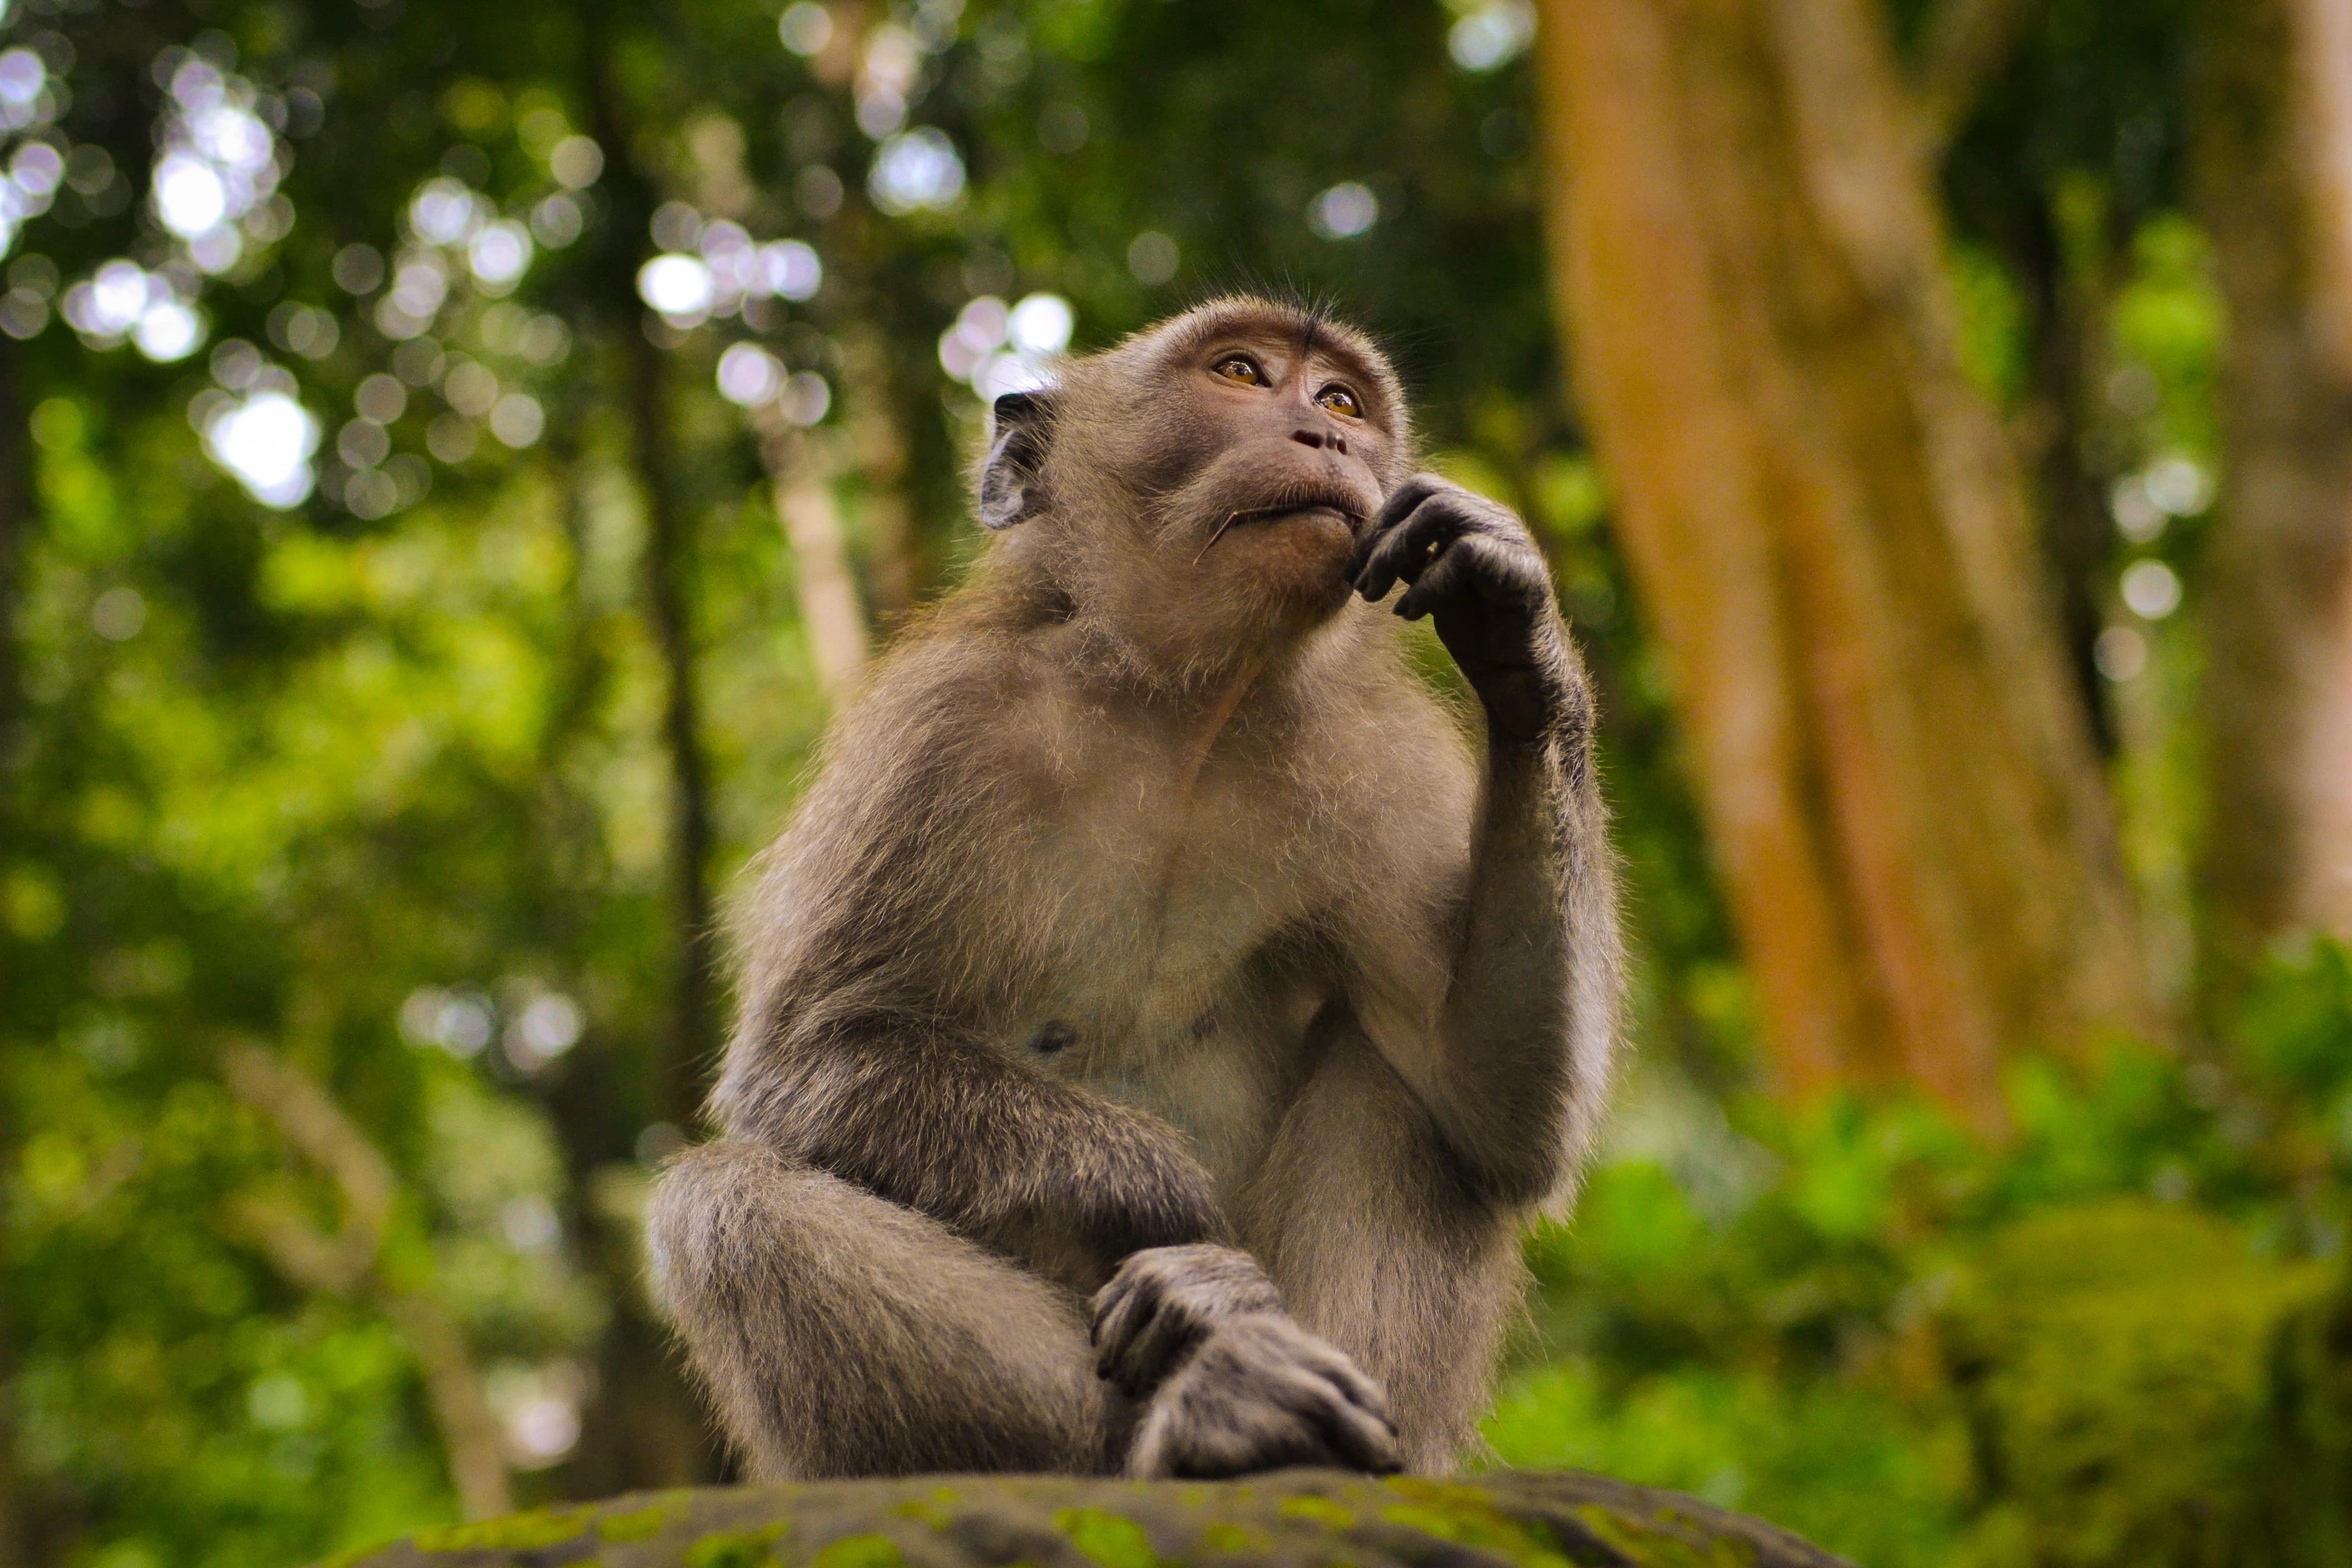 A monkey looking contemplative